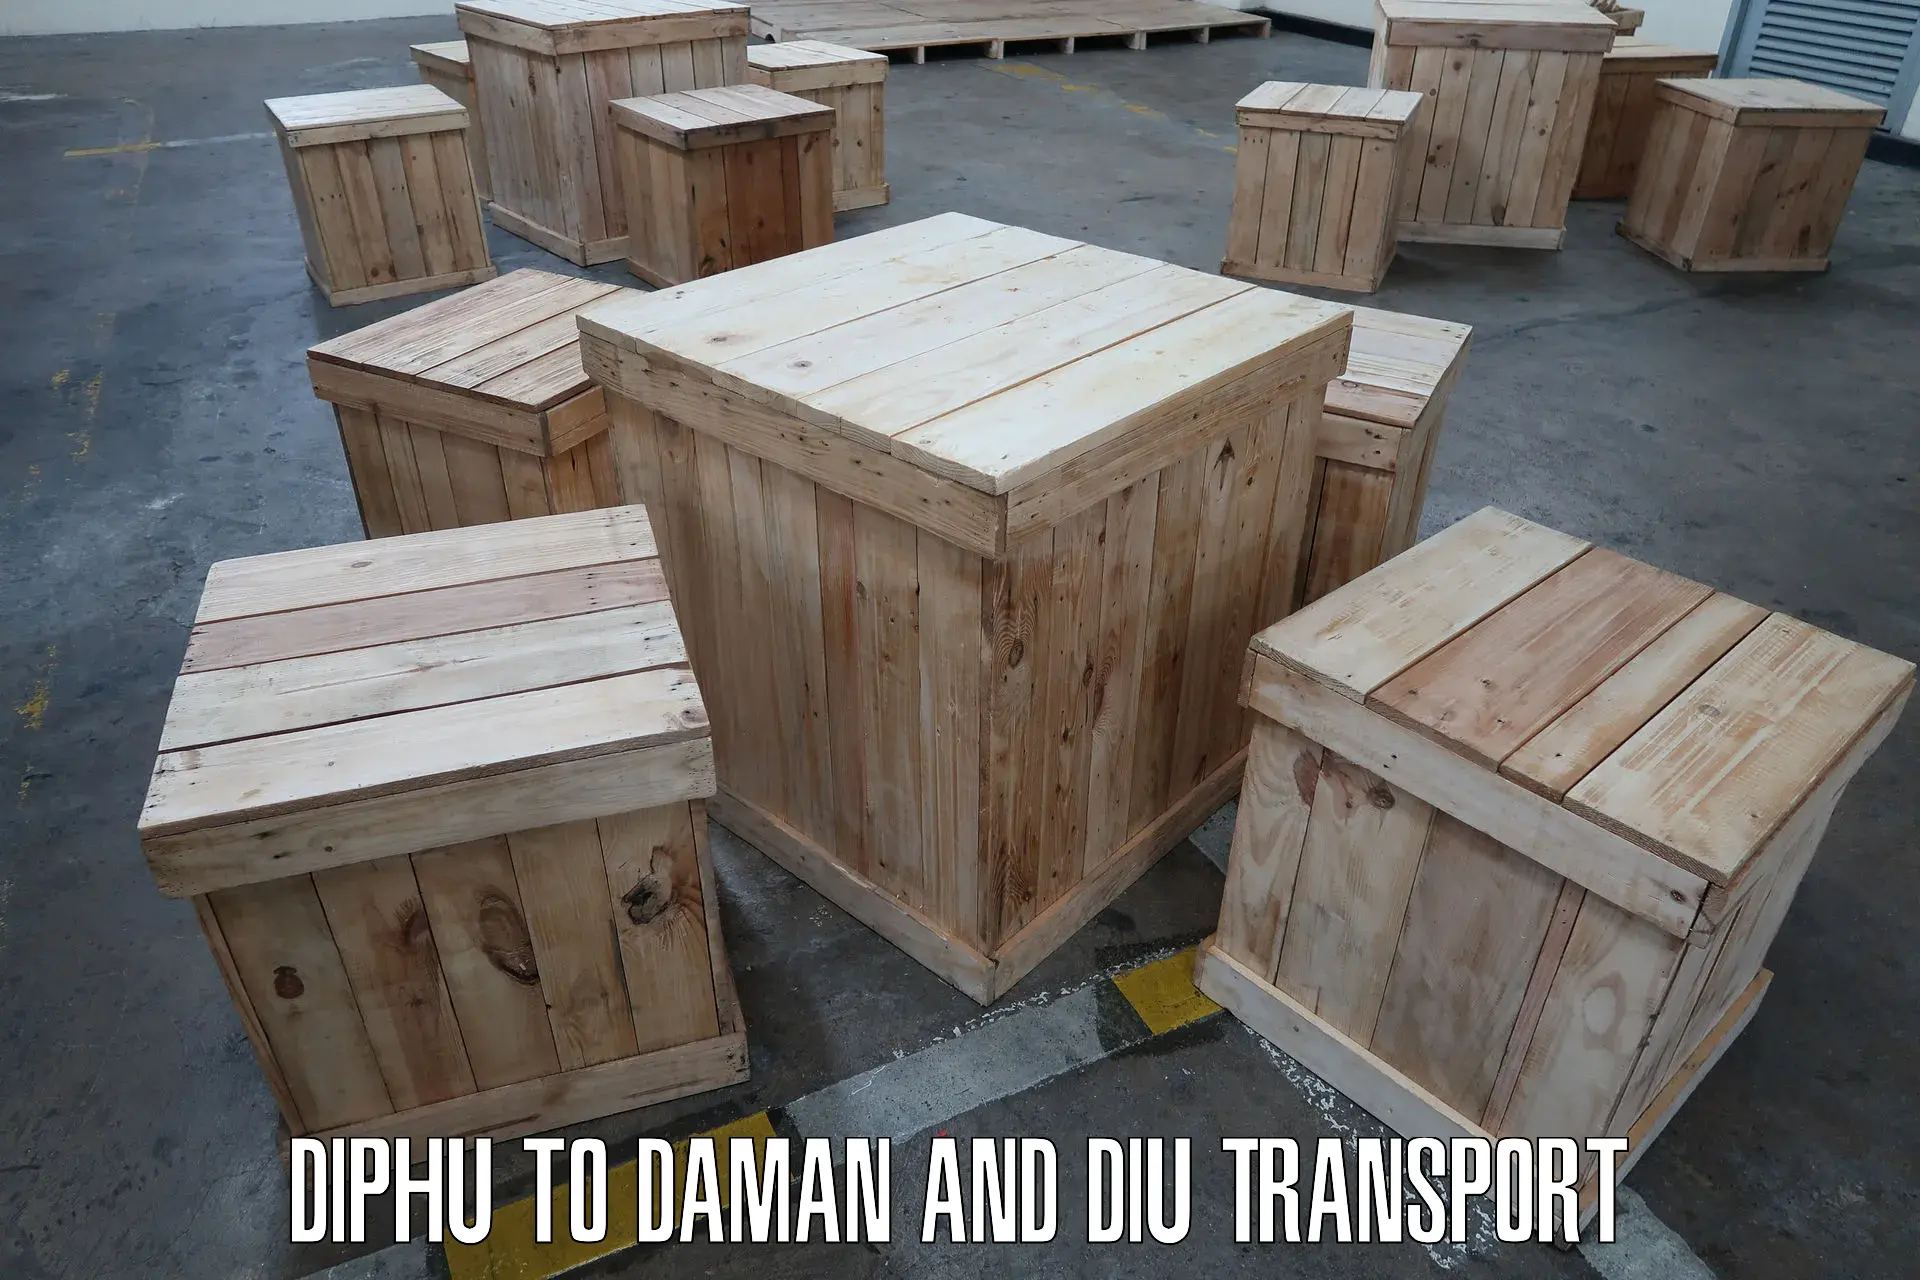 Transport bike from one state to another Diphu to Daman and Diu